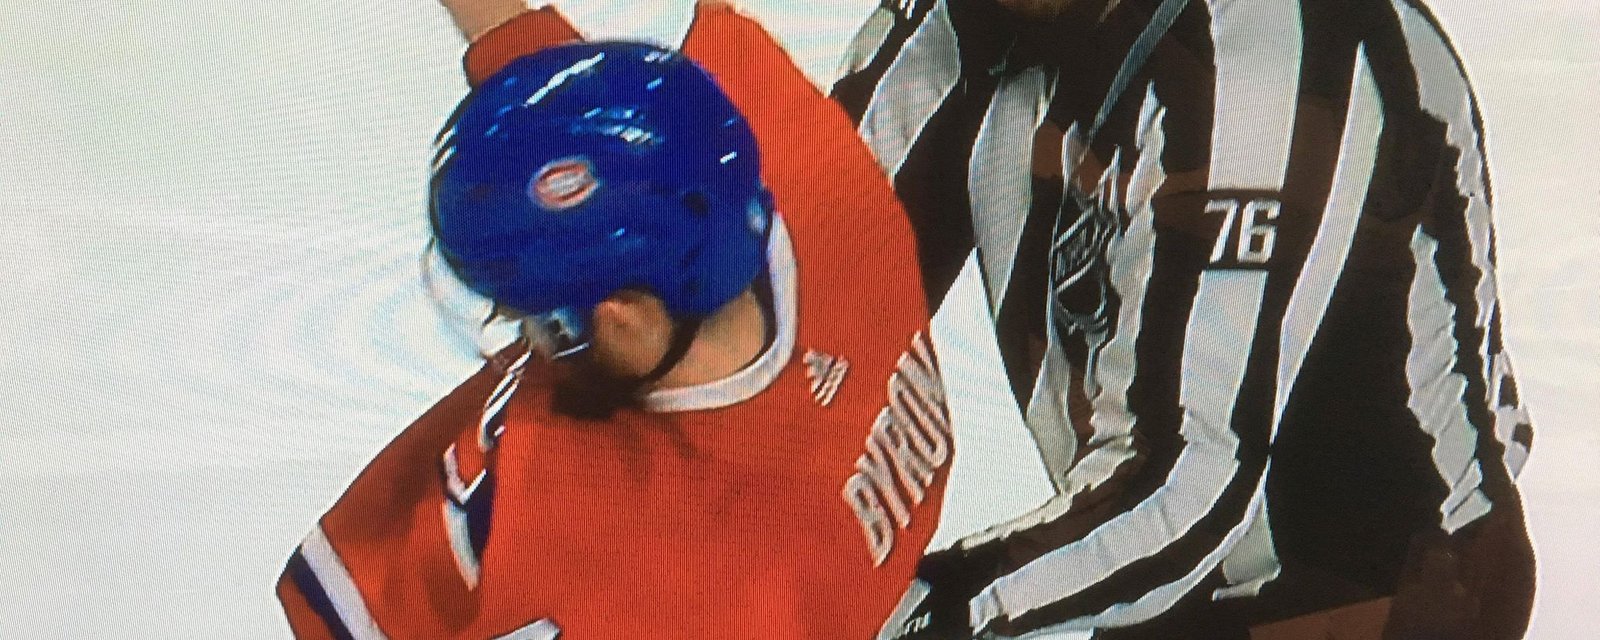 Habs’ Byron gets knocked out by brutal uppercut and can barely get off the ice! 